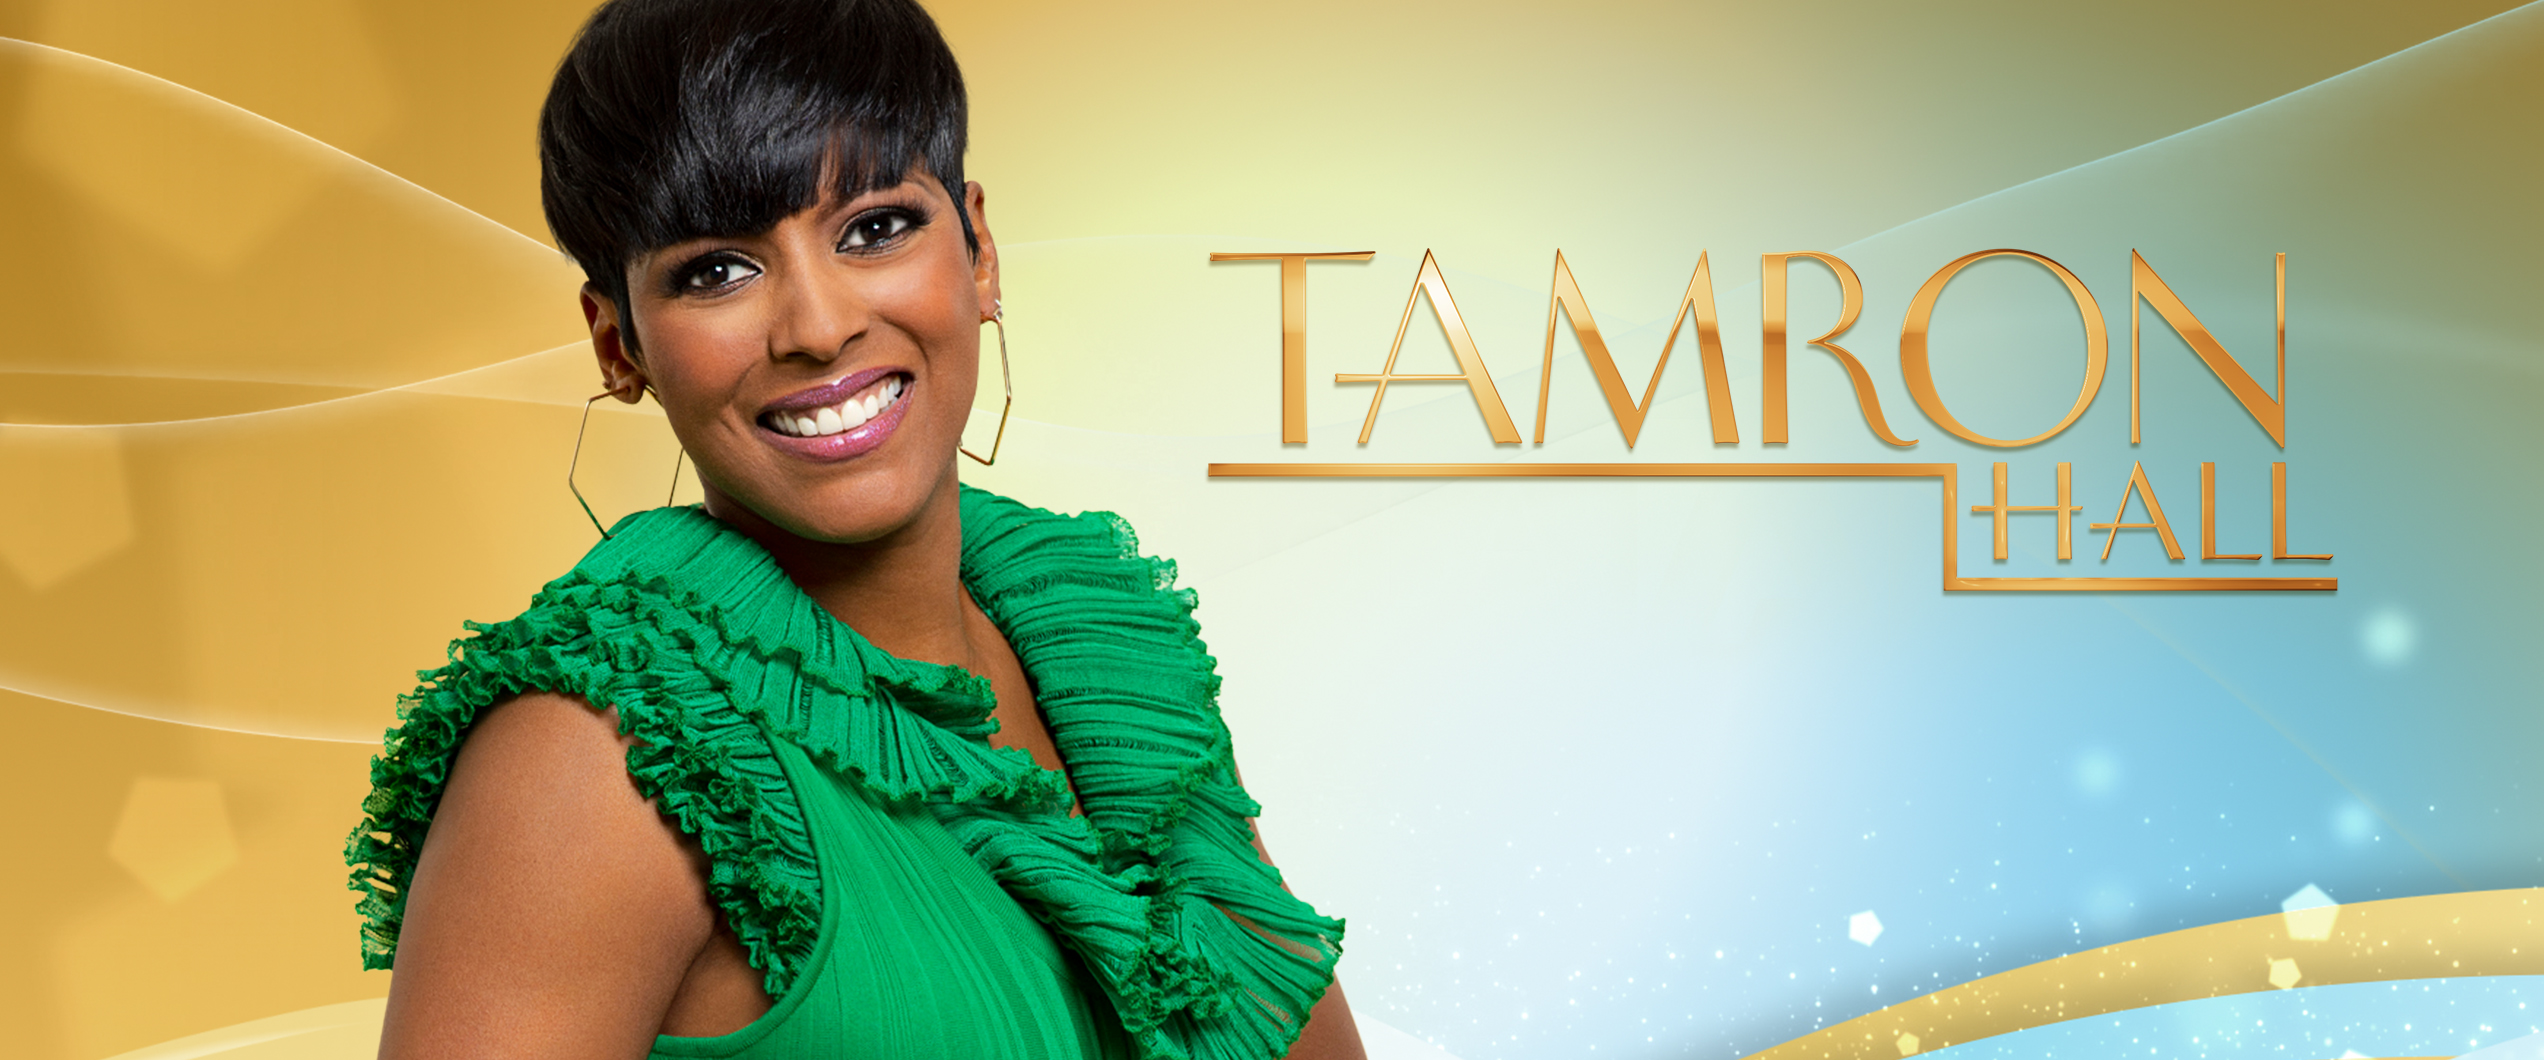 2bd58589 Bounce Tamronhall Show Page Banner 2544x1060 1 